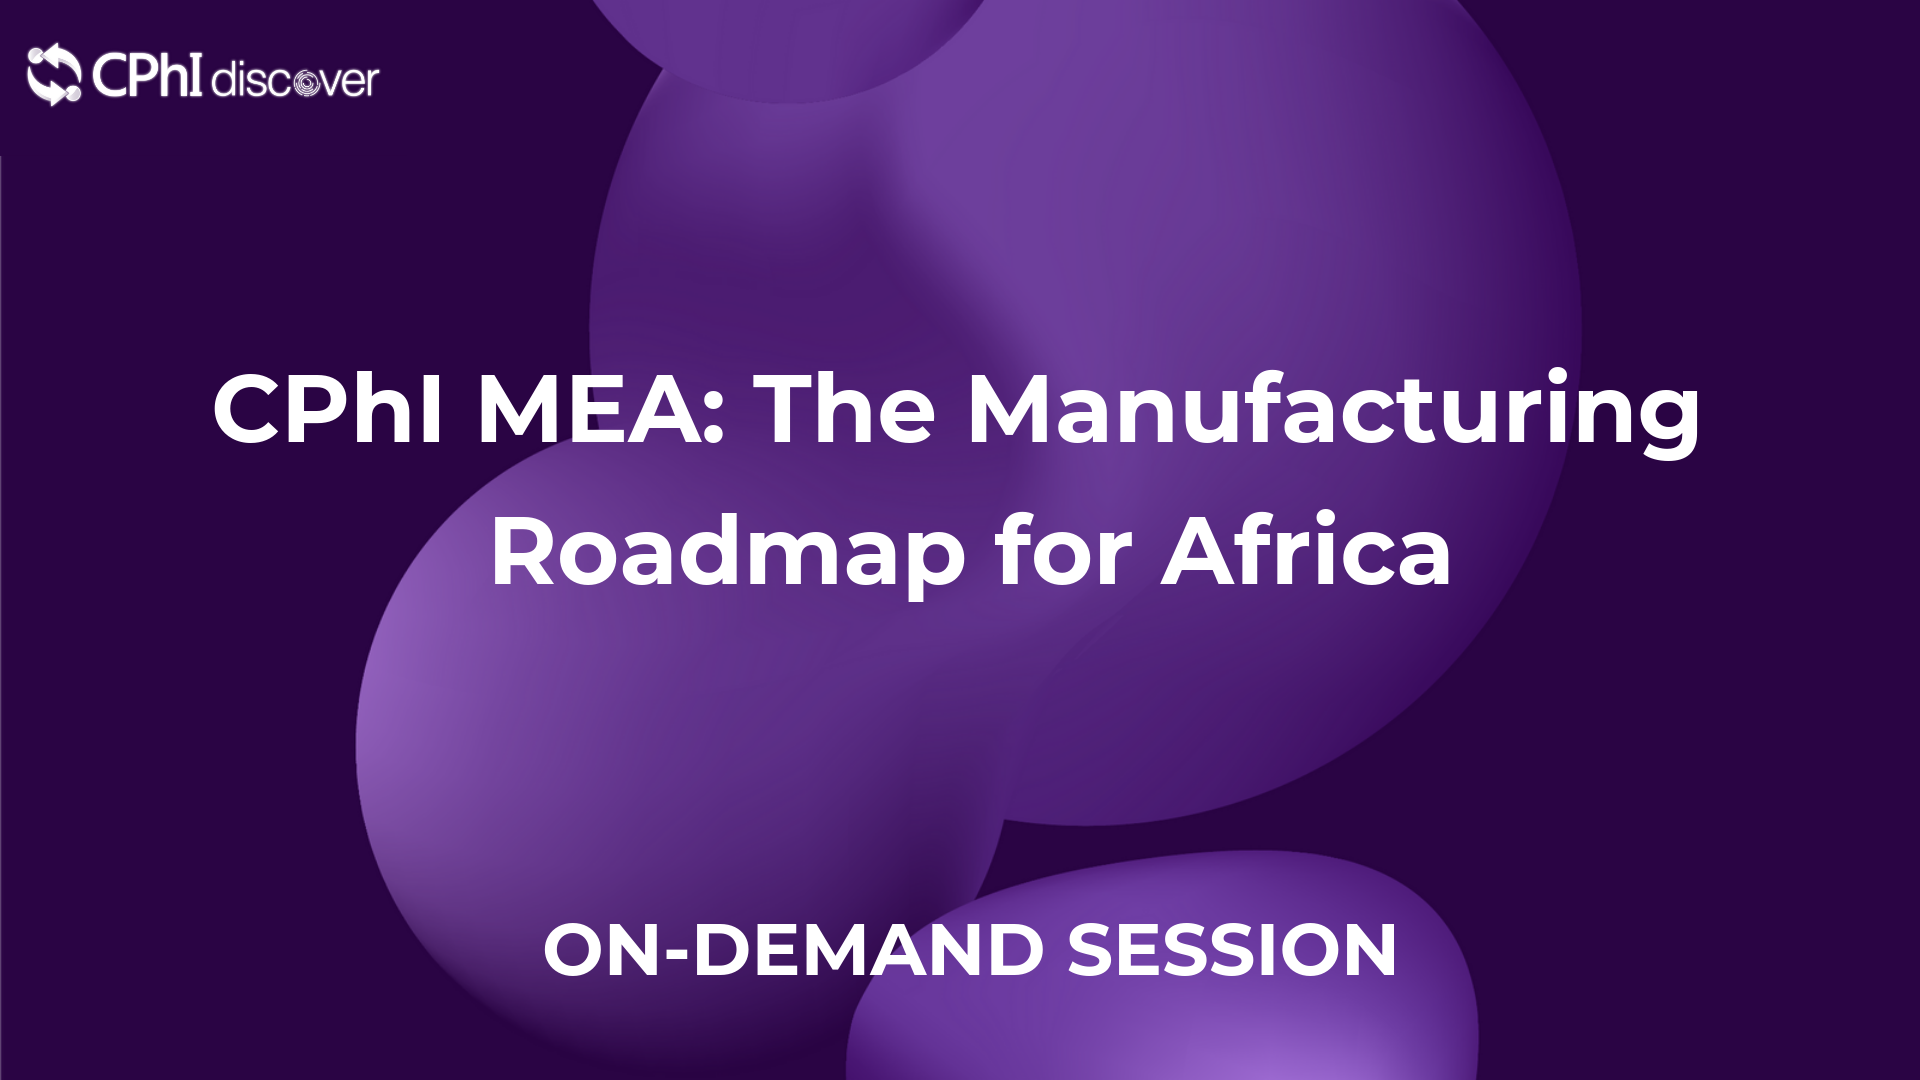 CPHI MEA: The Manufacturing Roadmap for Africa